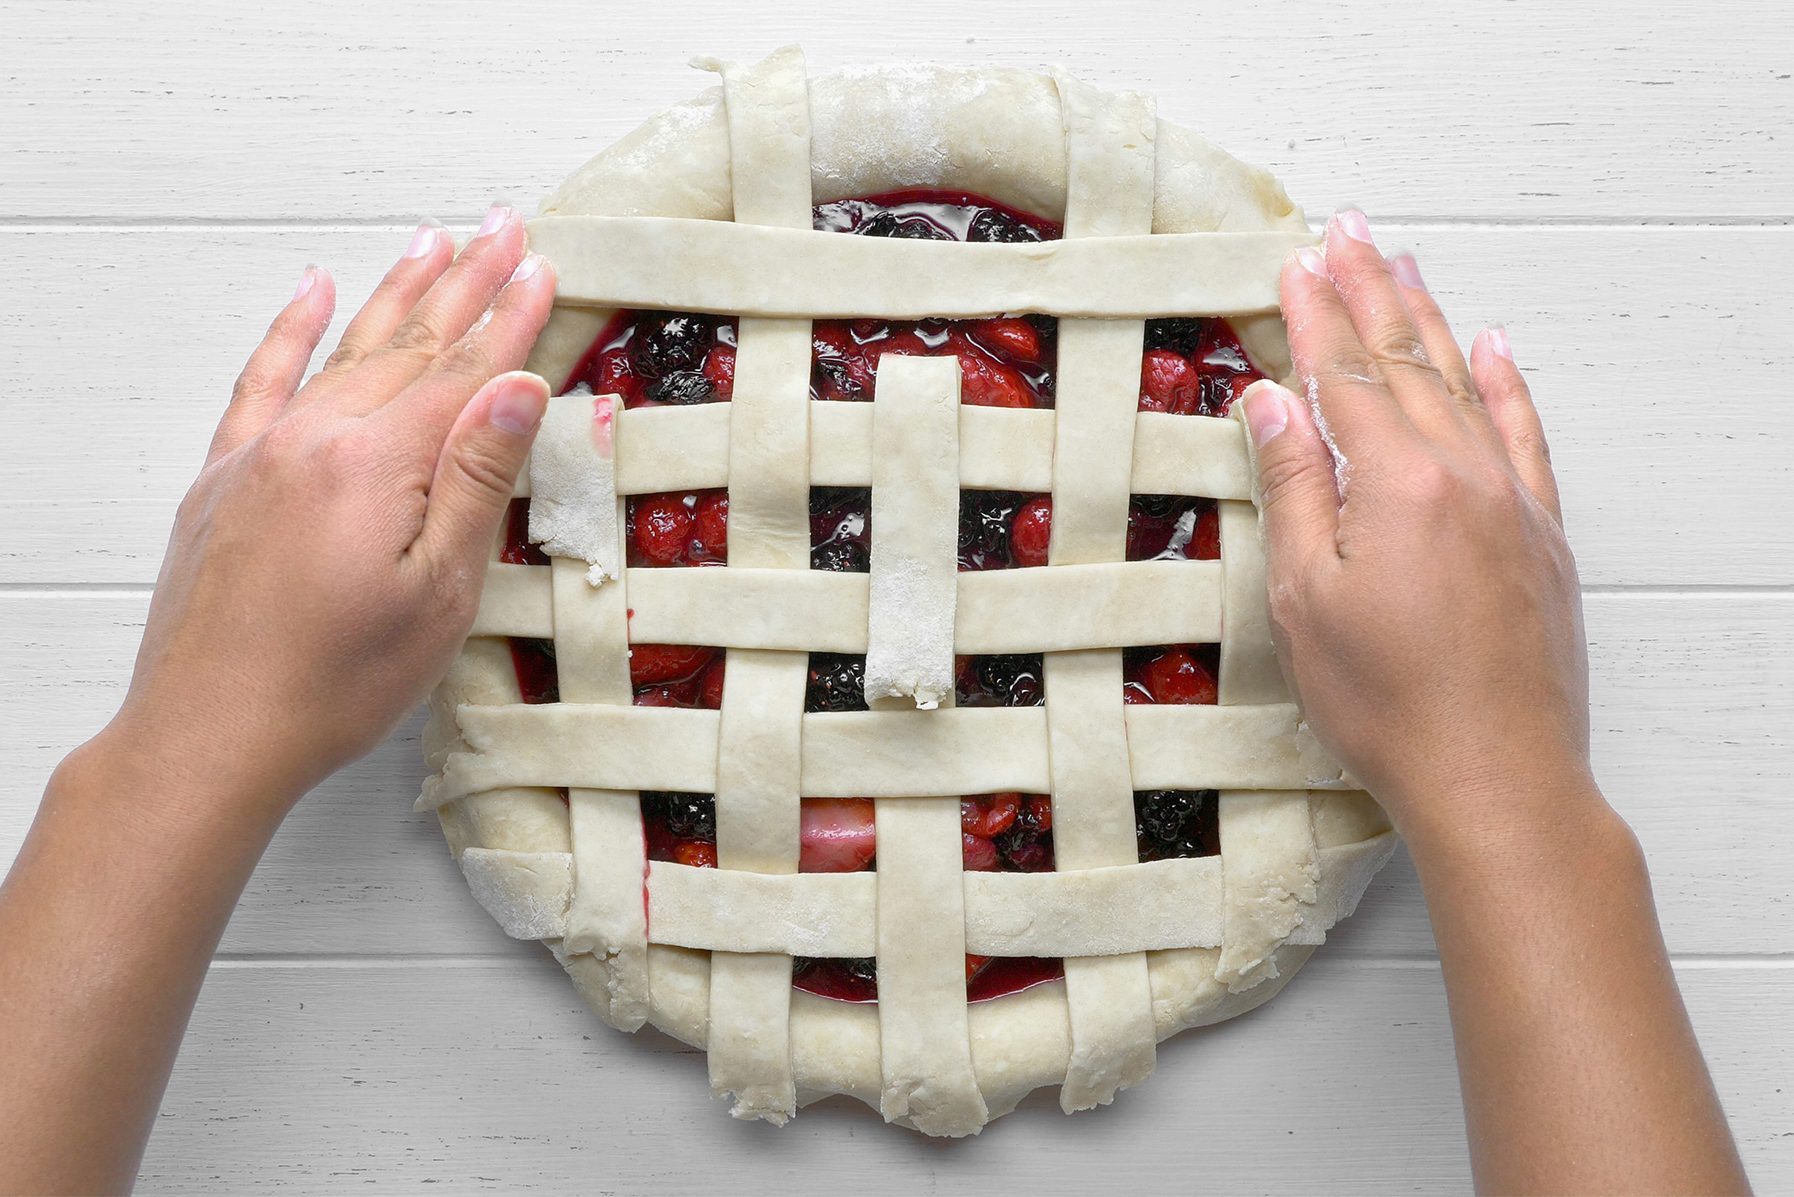 Two hands are weaving a lattice top crust over a fruit pie. The unbaked pie is filled with a mixed berry filling and is in the process of being prepared on a white wooden surface. 